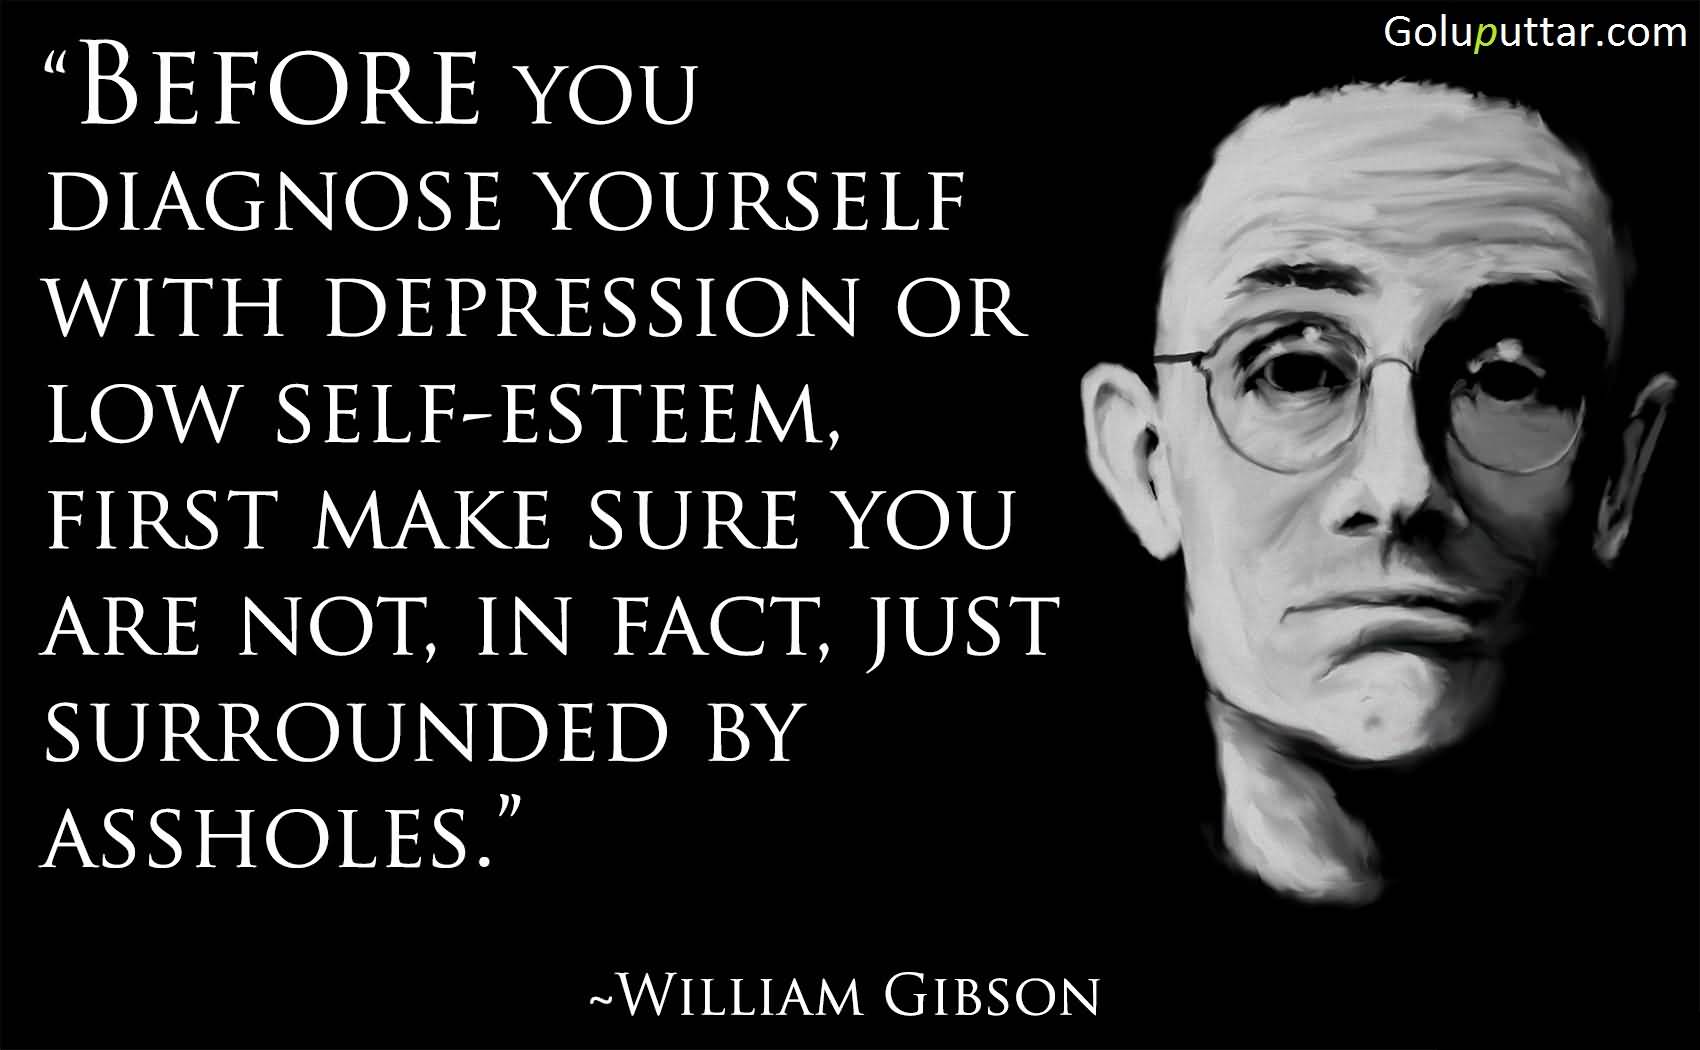 Before you diagnose yourself with depression or low self esteem, first make sure you are not, in fact, just surrounded by assholes. William Gibson